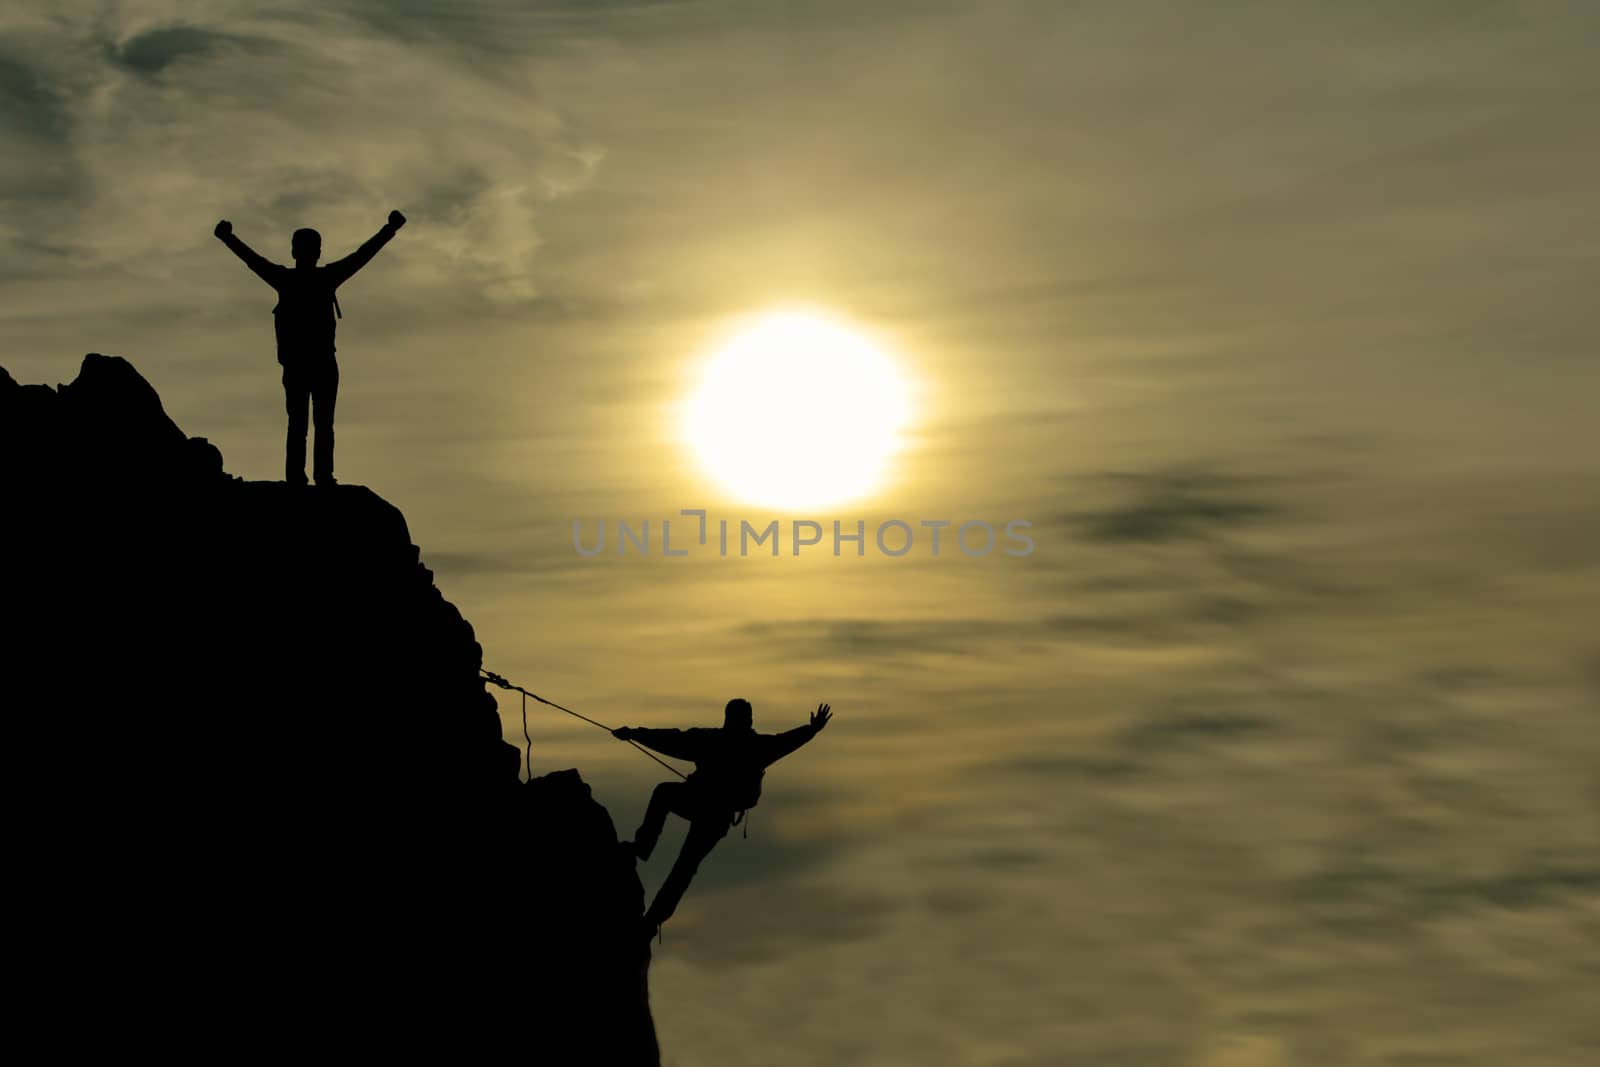 successful climb and make the summit a success by crazymedia007